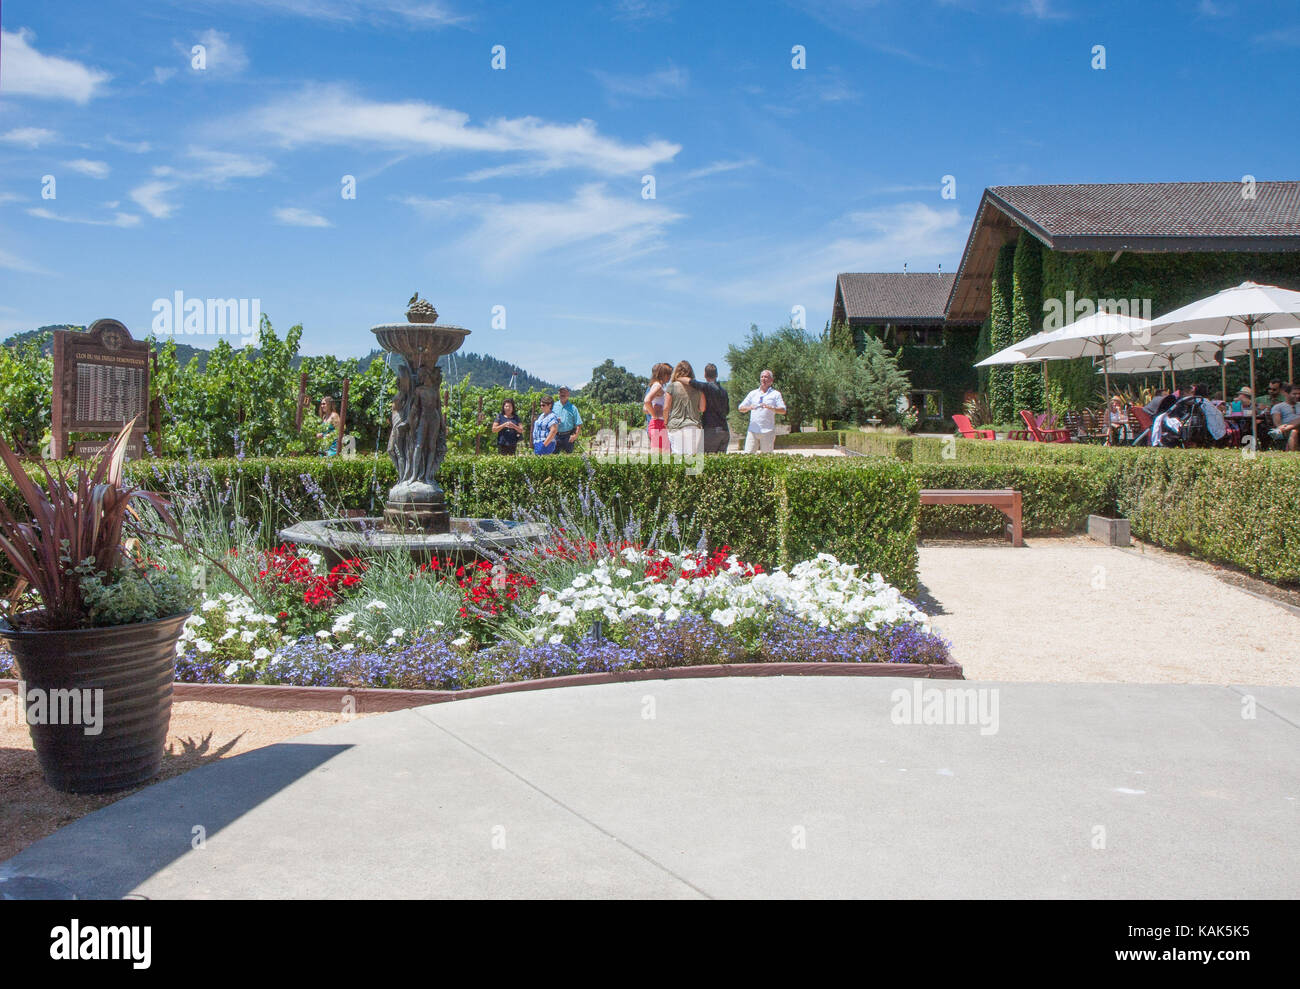 Napa Valley winery with fountain in mid-ground, people drinking wine, and vineyards in background. Winery on right side with umbrella-covered tables. Stock Photo